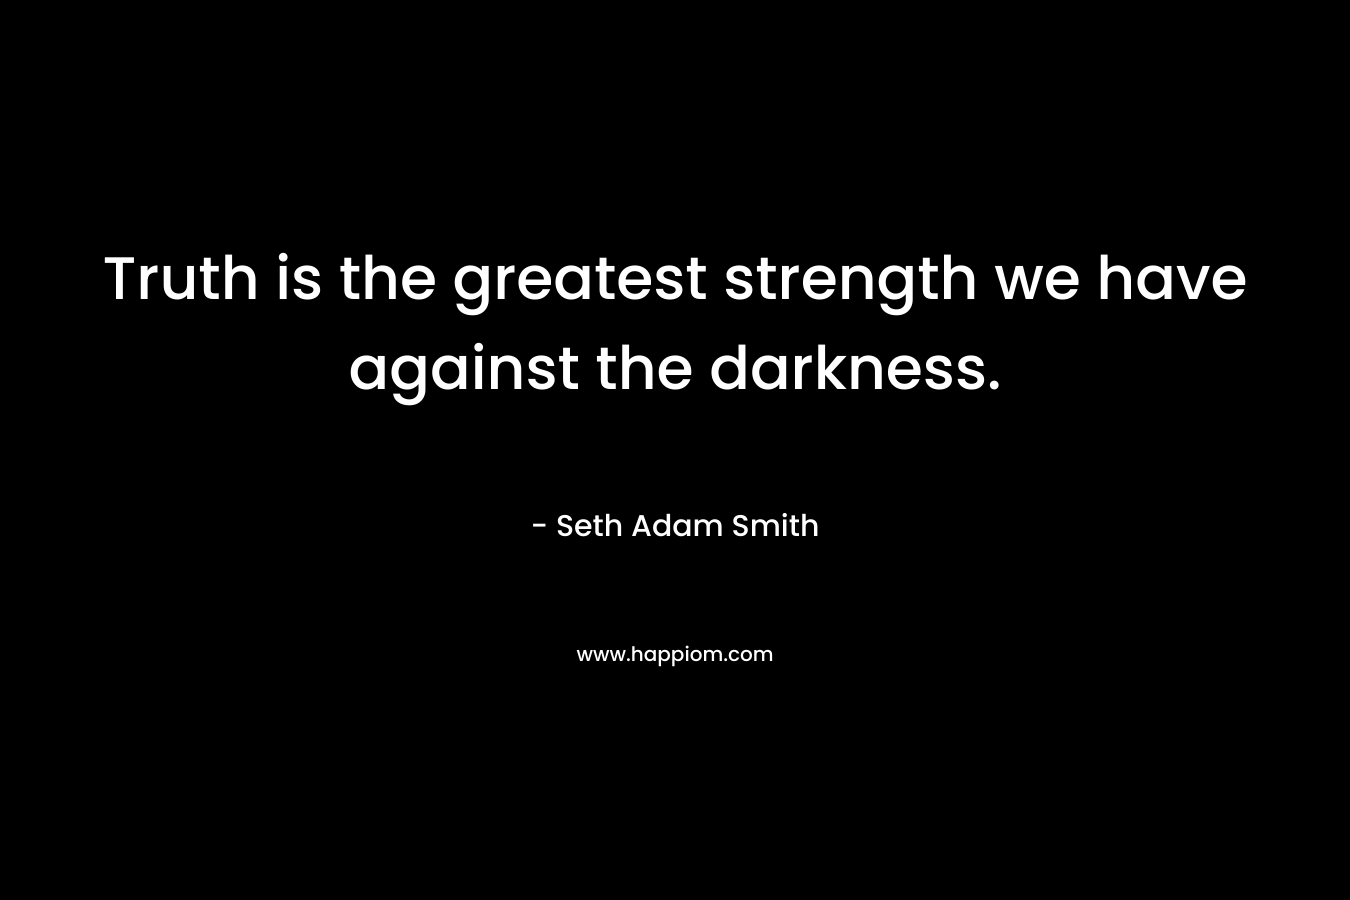 Truth is the greatest strength we have against the darkness.